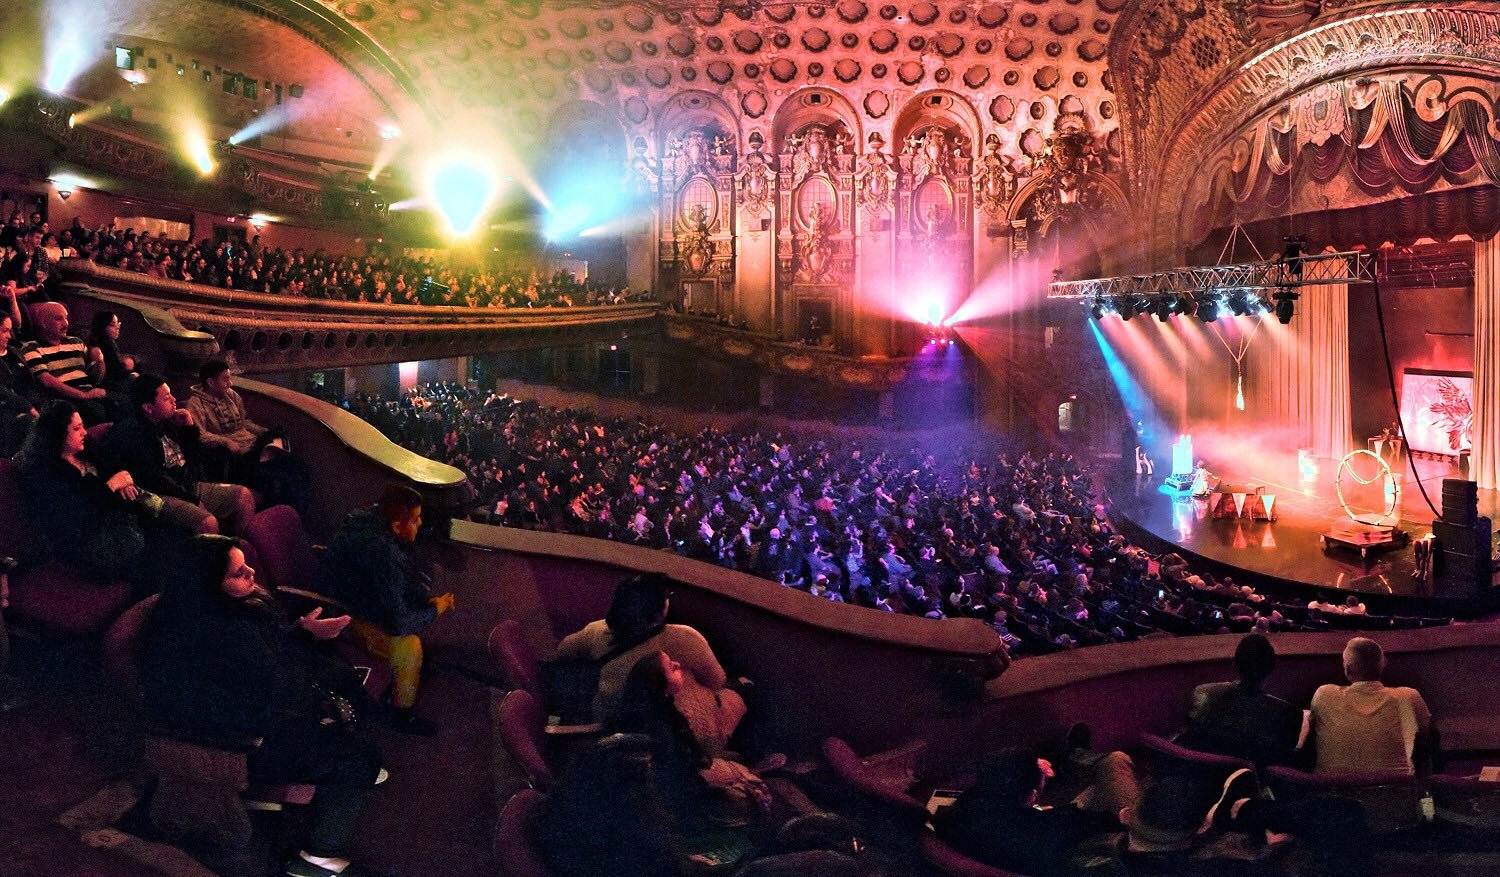 Lucent Dossier Los Angeles Theater Broadway photog Wendell Benedetti big Crowd .JPG